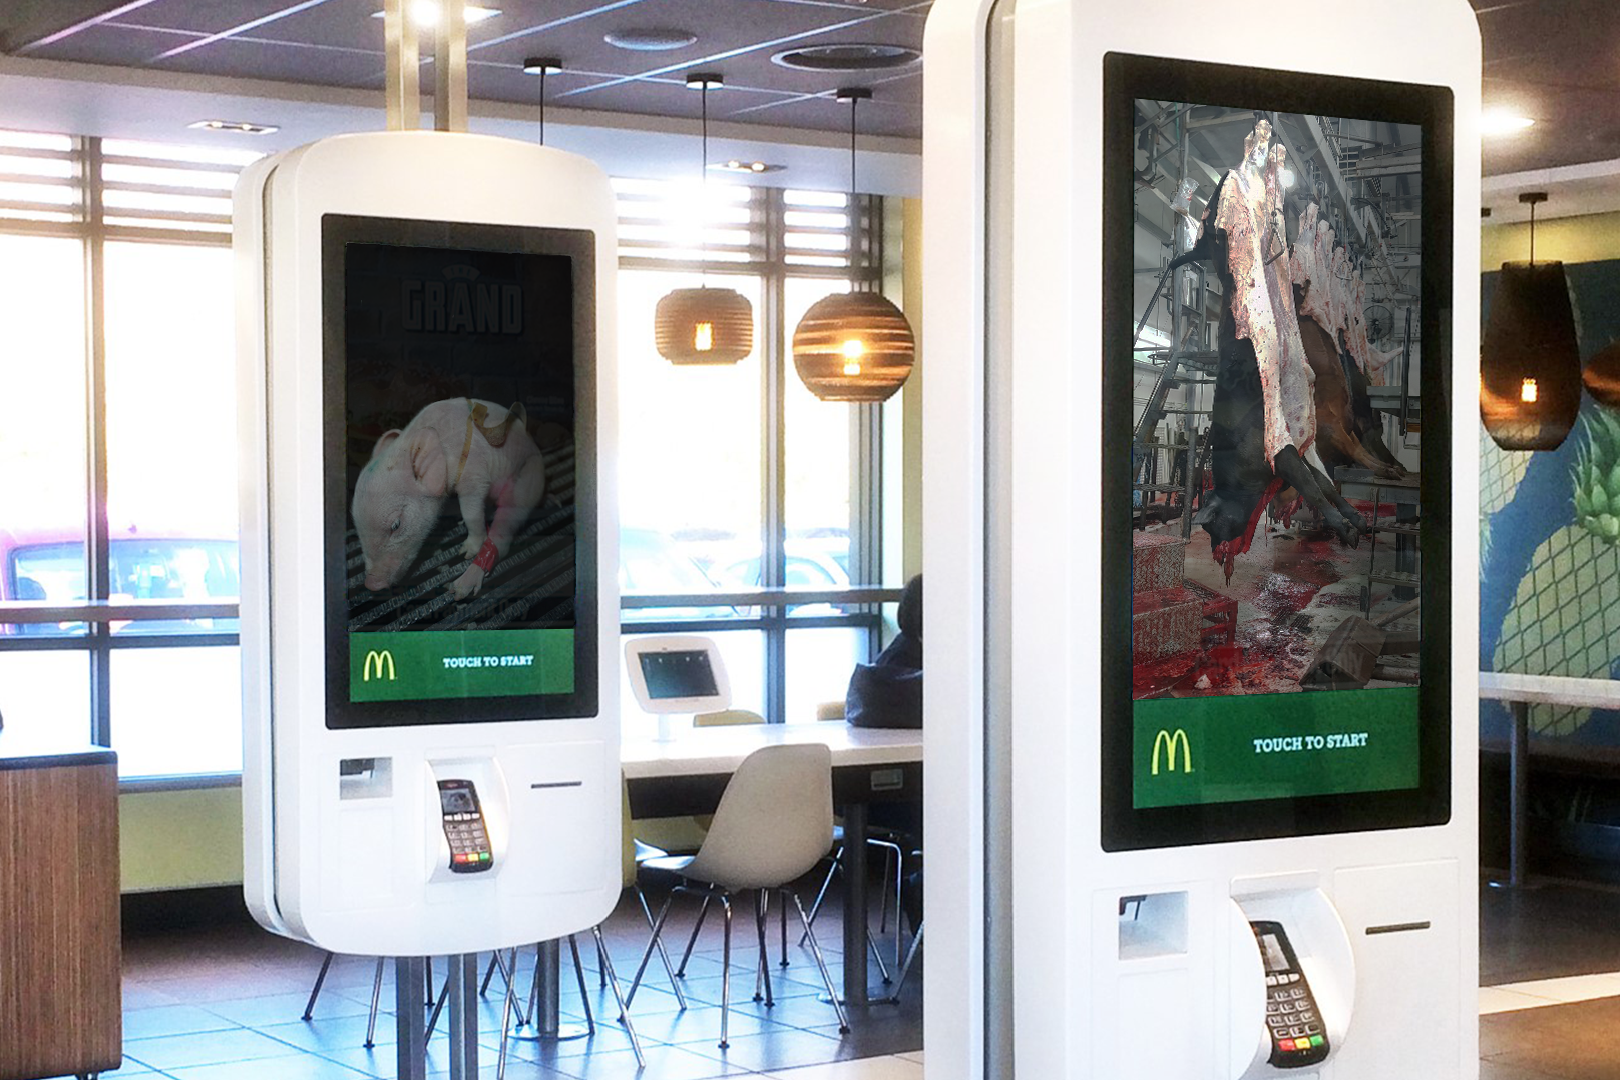 McDonald's must display footage of how animals are treated of farms and slaughterhouses